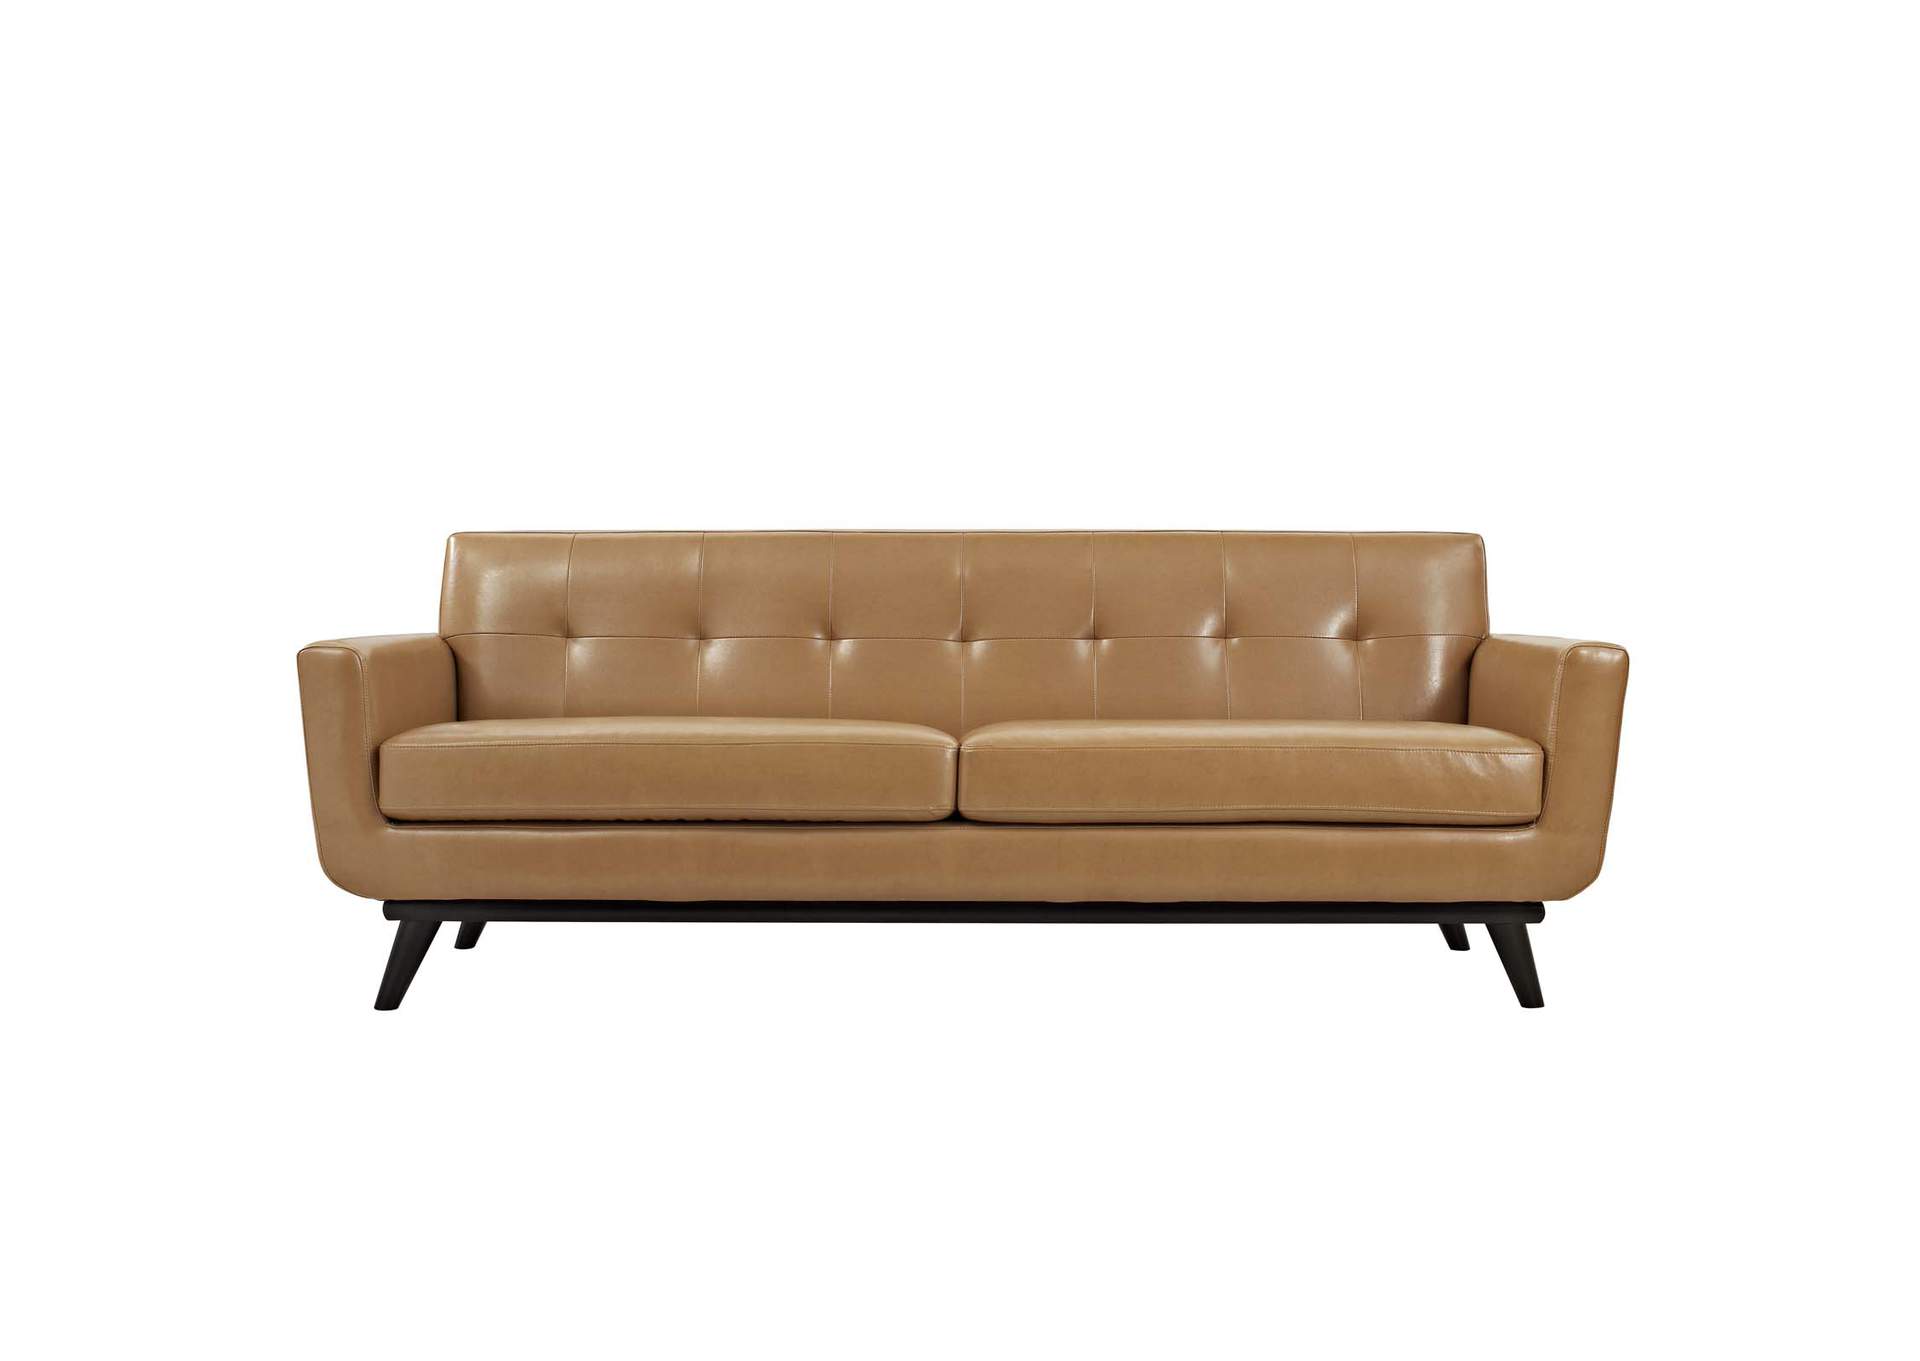 Tan Engage Bonded Leather Sofa Big Box, Bonded Leather Couch